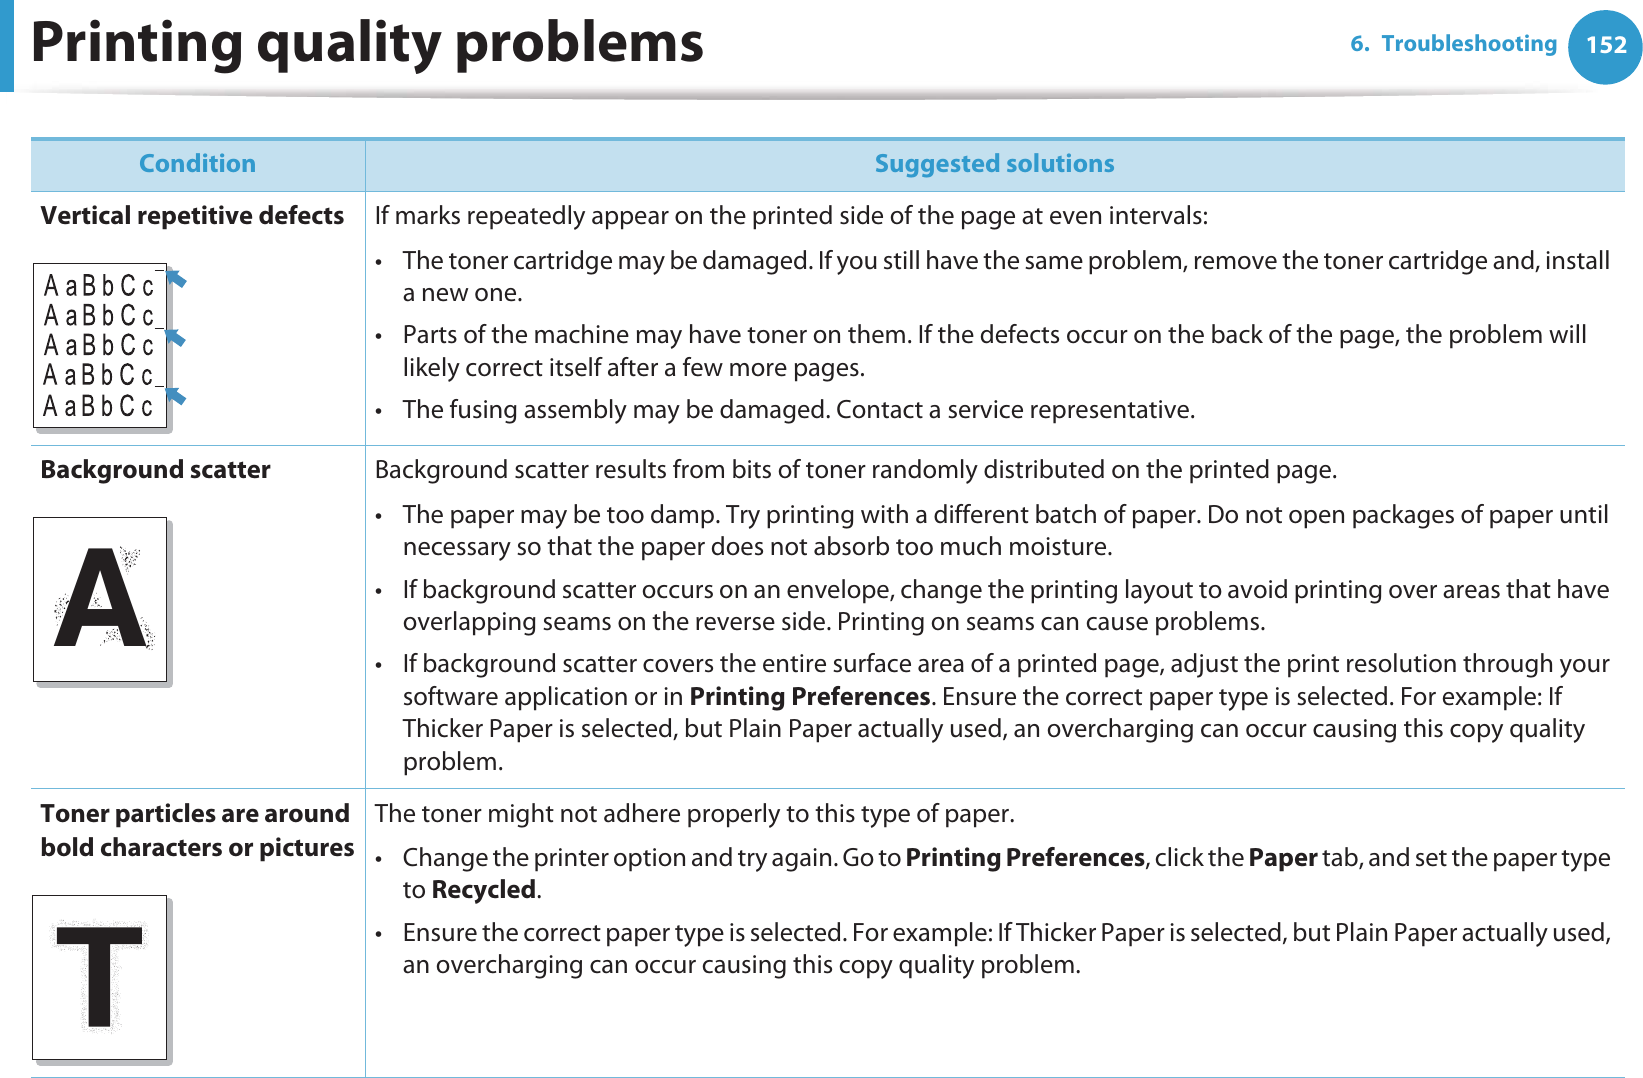 Printing quality problems 1526. TroubleshootingVertical repetitive defects If marks repeatedly appear on the printed side of the page at even intervals:• The toner cartridge may be damaged. If you still have the same problem, remove the toner cartridge and, install a new one.• Parts of the machine may have toner on them. If the defects occur on the back of the page, the problem will likely correct itself after a few more pages.• The fusing assembly may be damaged. Contact a service representative.Background scatter Background scatter results from bits of toner randomly distributed on the printed page. • The paper may be too damp. Try printing with a different batch of paper. Do not open packages of paper until necessary so that the paper does not absorb too much moisture.• If background scatter occurs on an envelope, change the printing layout to avoid printing over areas that have overlapping seams on the reverse side. Printing on seams can cause problems.• If background scatter covers the entire surface area of a printed page, adjust the print resolution through your software application or in Printing Preferences. Ensure the correct paper type is selected. For example: If Thicker Paper is selected, but Plain Paper actually used, an overcharging can occur causing this copy quality problem.Toner particles are around bold characters or picturesThe toner might not adhere properly to this type of paper.• Change the printer option and try again. Go to Printing Preferences, click the Paper tab, and set the paper type to Recycled. • Ensure the correct paper type is selected. For example: If Thicker Paper is selected, but Plain Paper actually used, an overcharging can occur causing this copy quality problem.Condition Suggested solutionsA